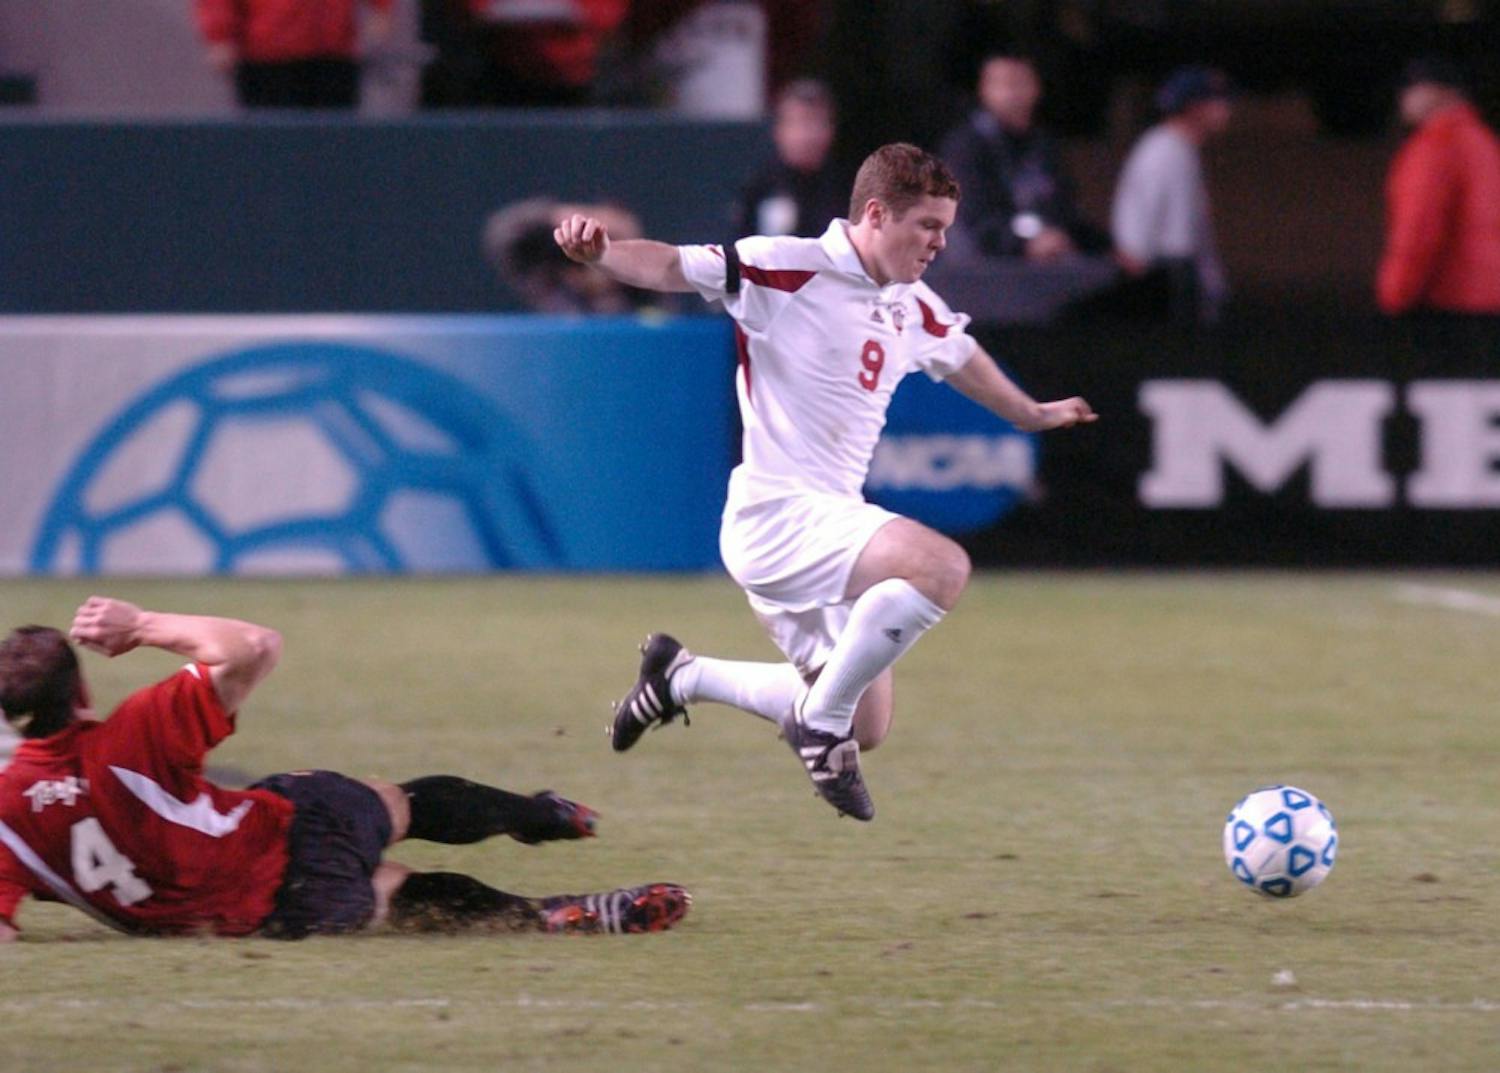 GALLERY: A visual history of IU men's soccer in 2004